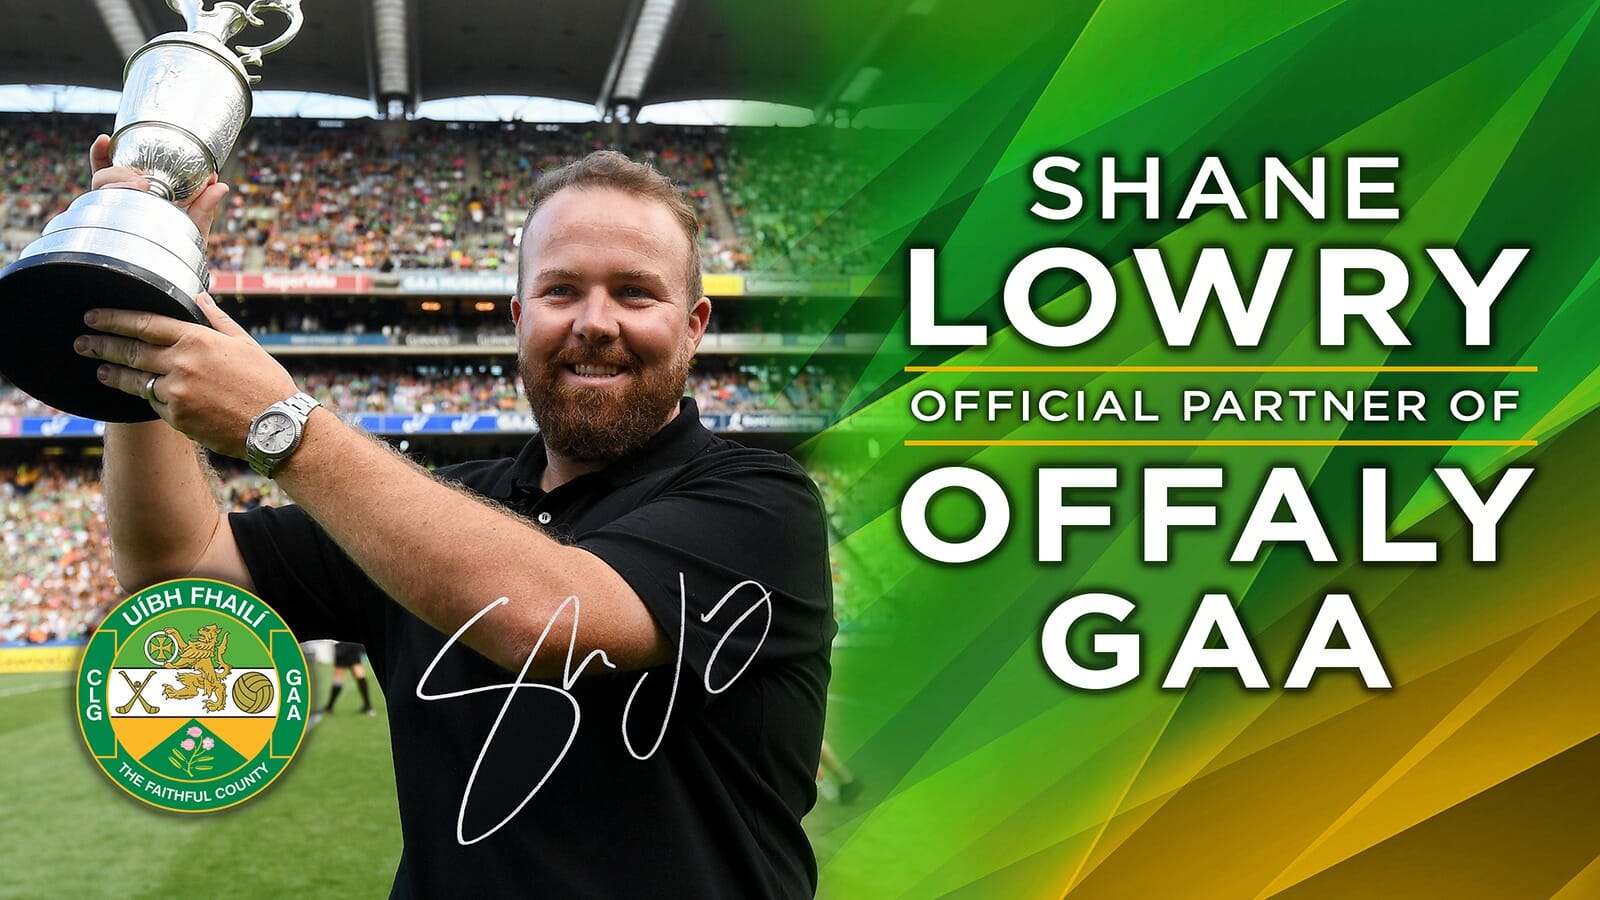 Shane Lowry to Partner with Offaly GAA